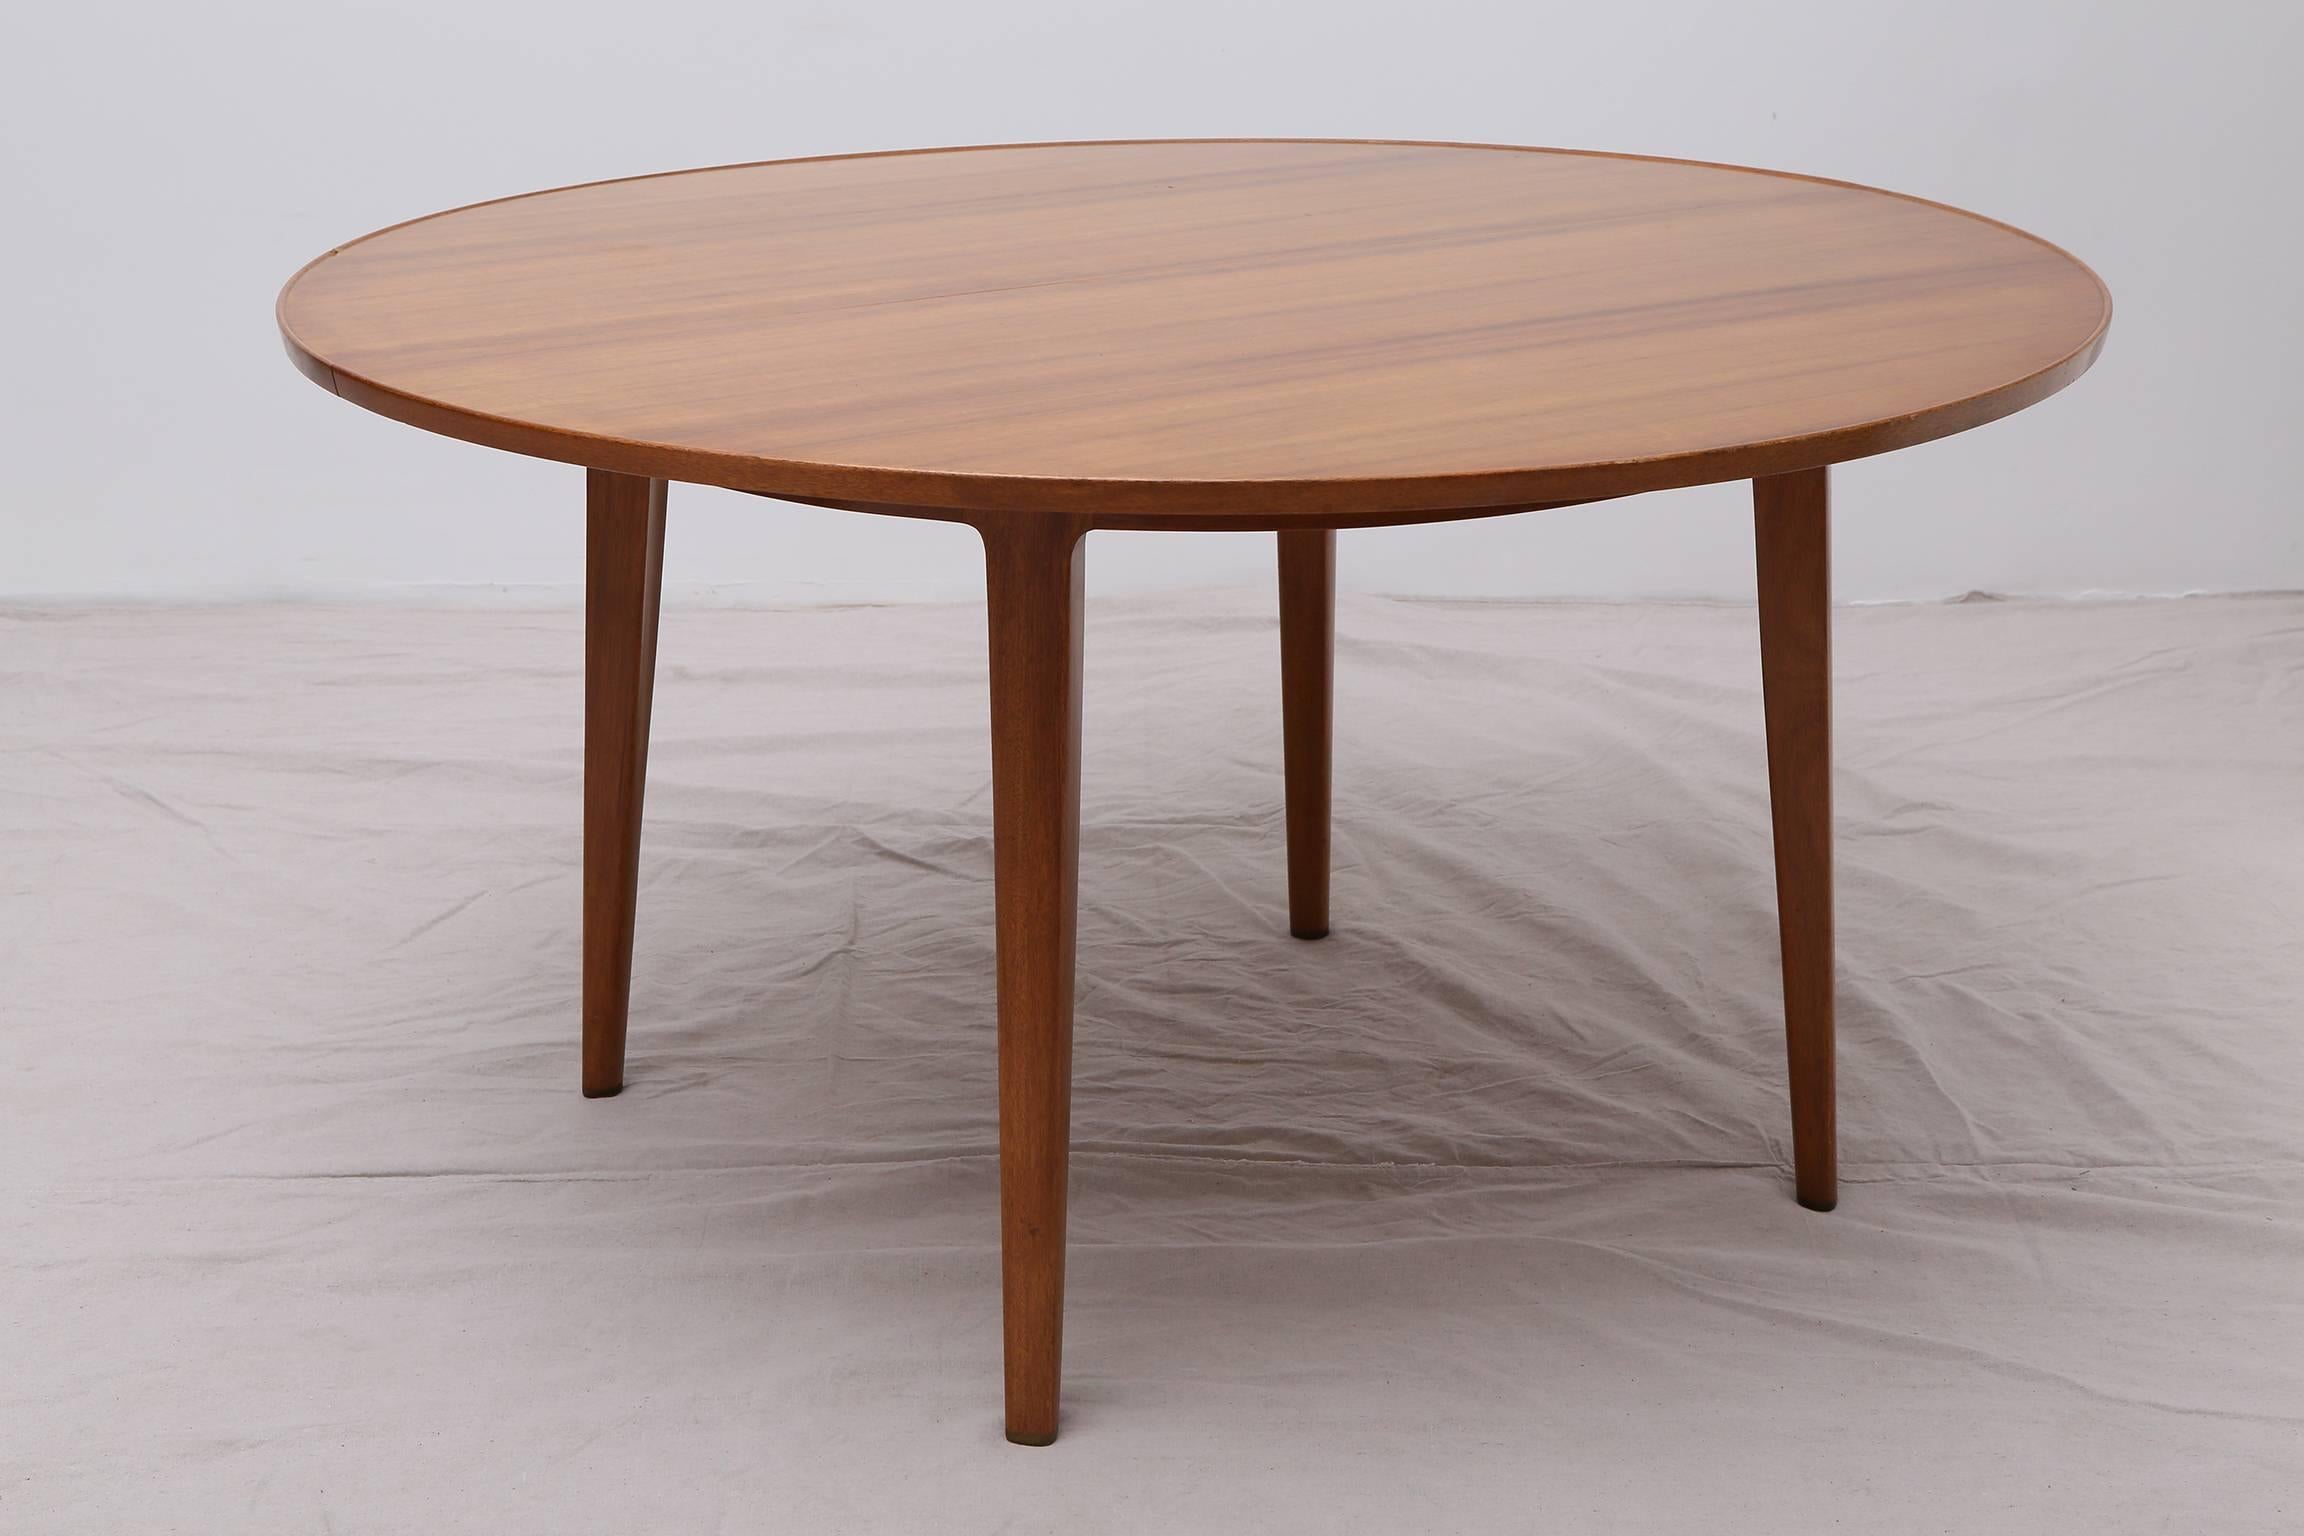 A handsome bleached mahogany dining table by Edward Wormley for Dunbar, circa 1950. Featuring a generous round top with raised lip and four sturdy, tapered legs finished with brass sabots. Two removable leaves allow table to easily accommodate eight